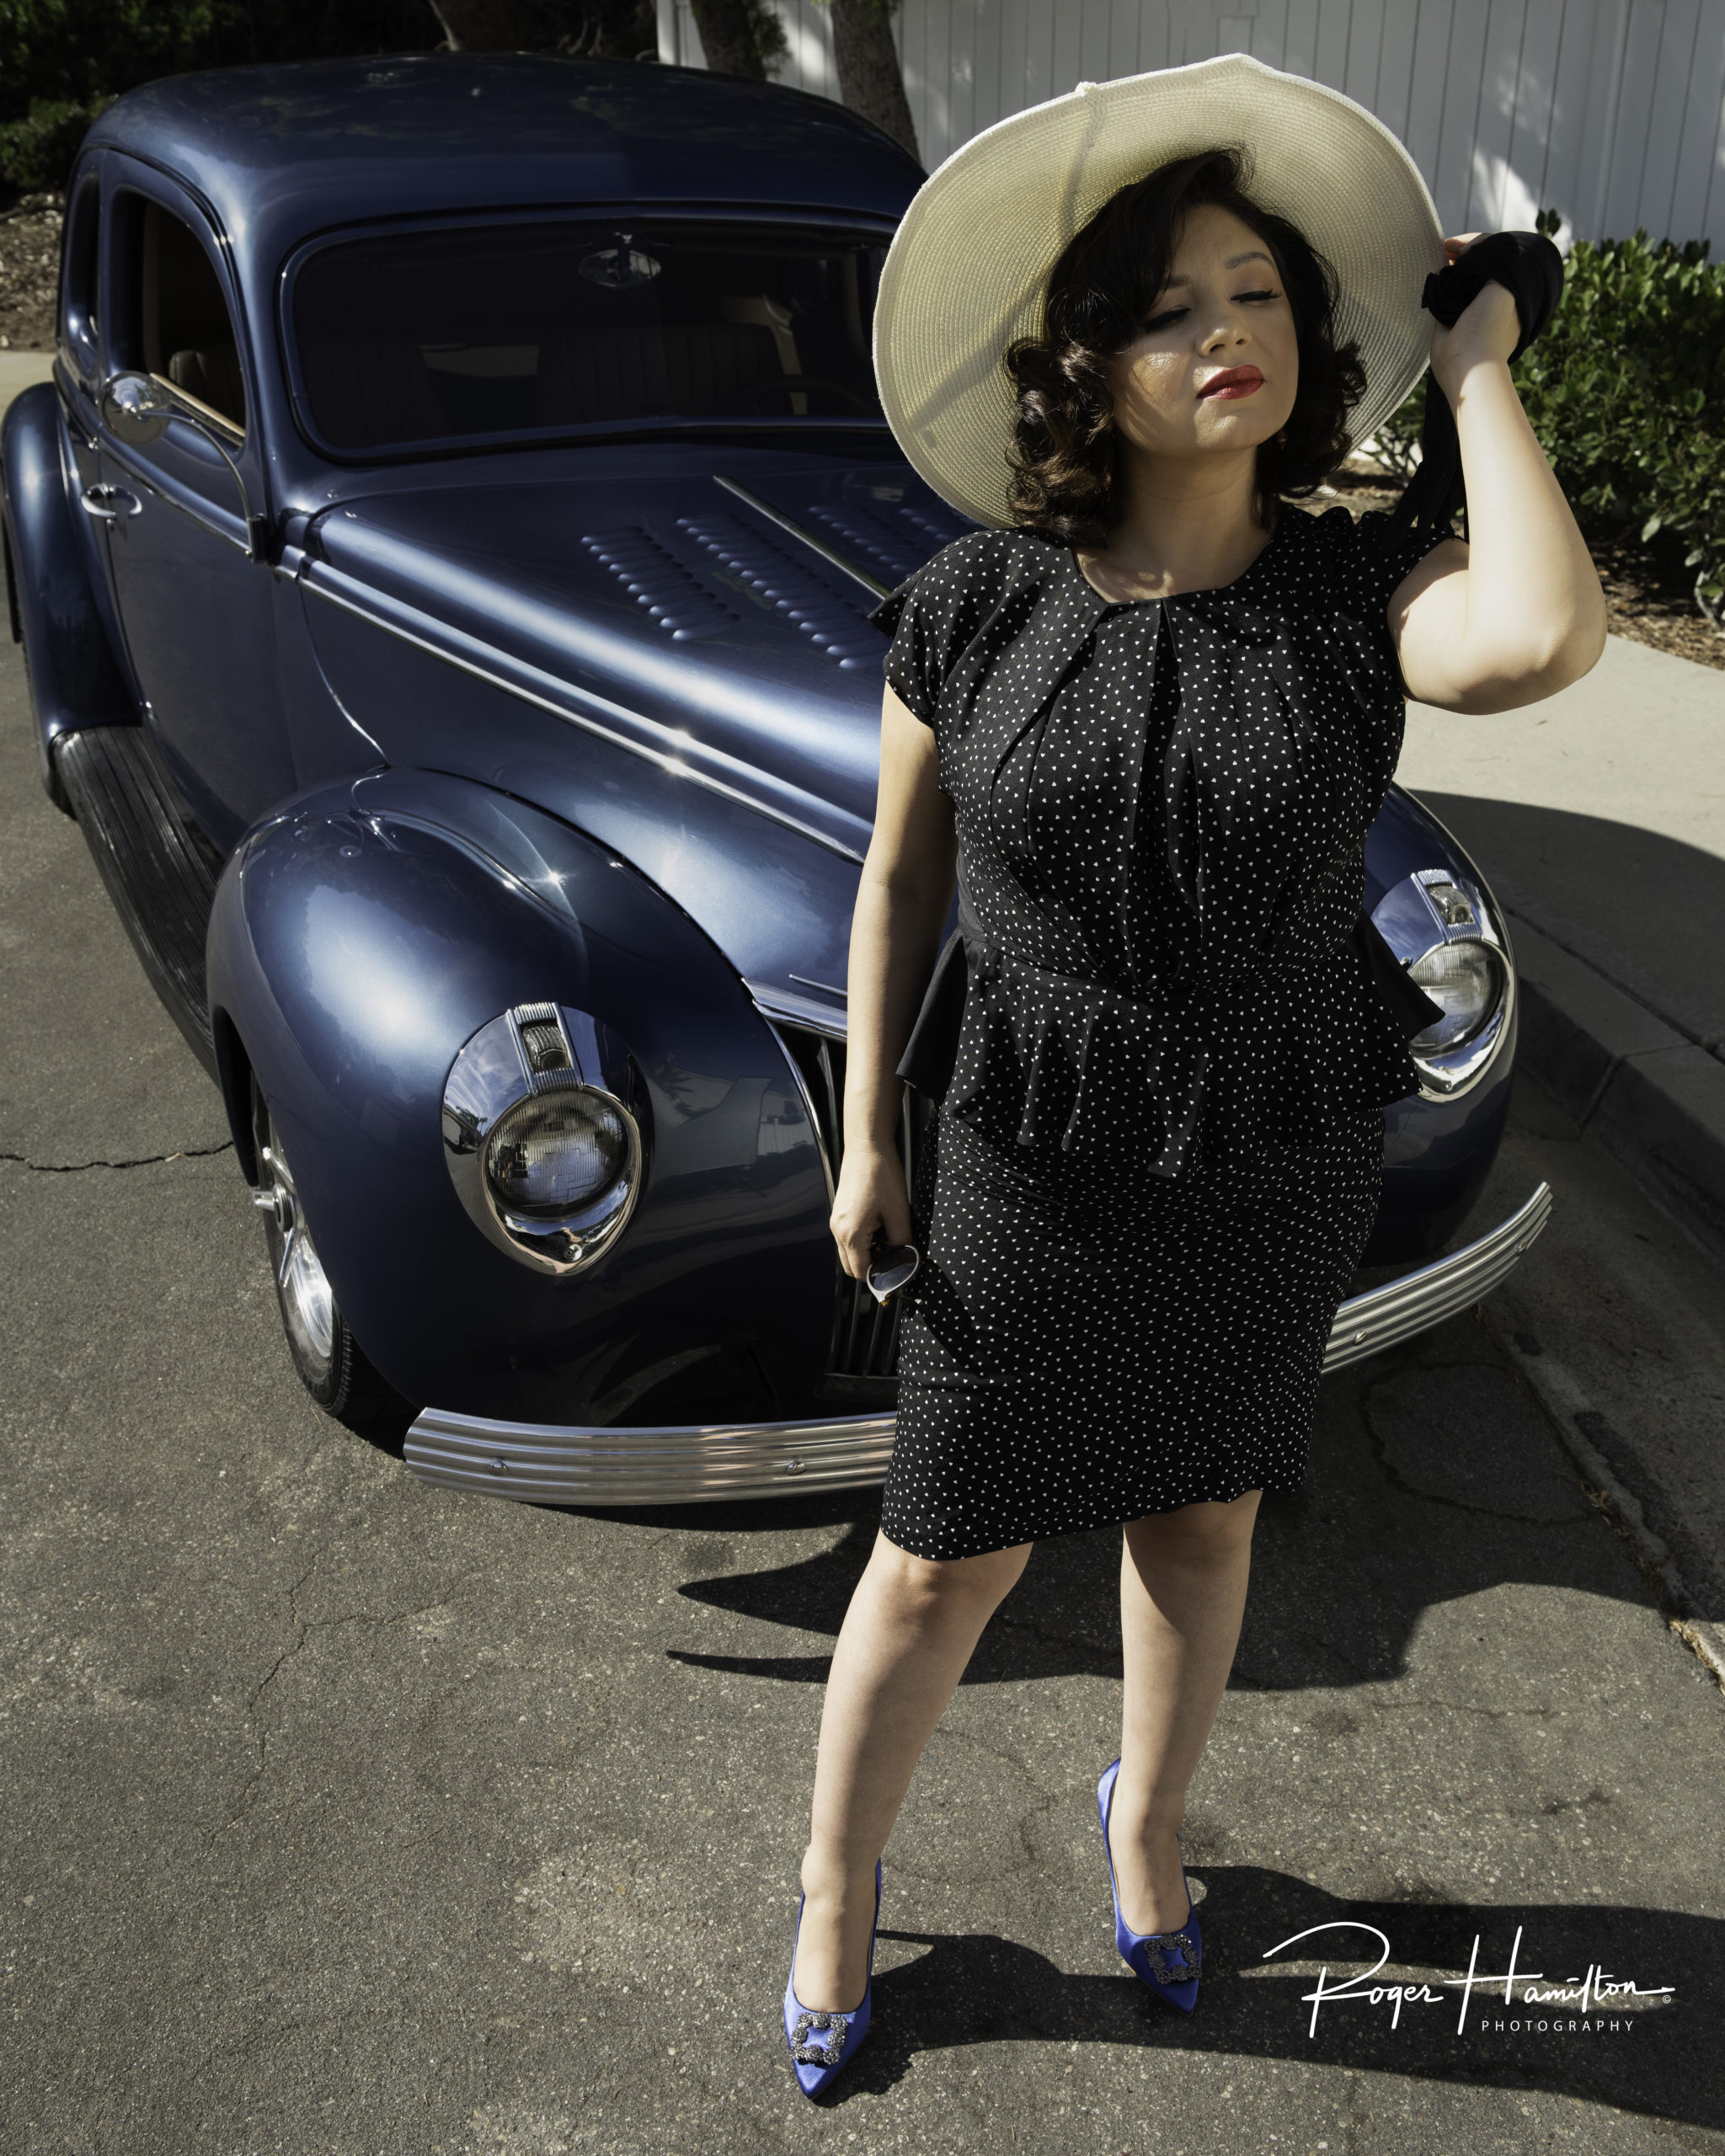 Patricia rocking the 1940s look in front of a vintage car